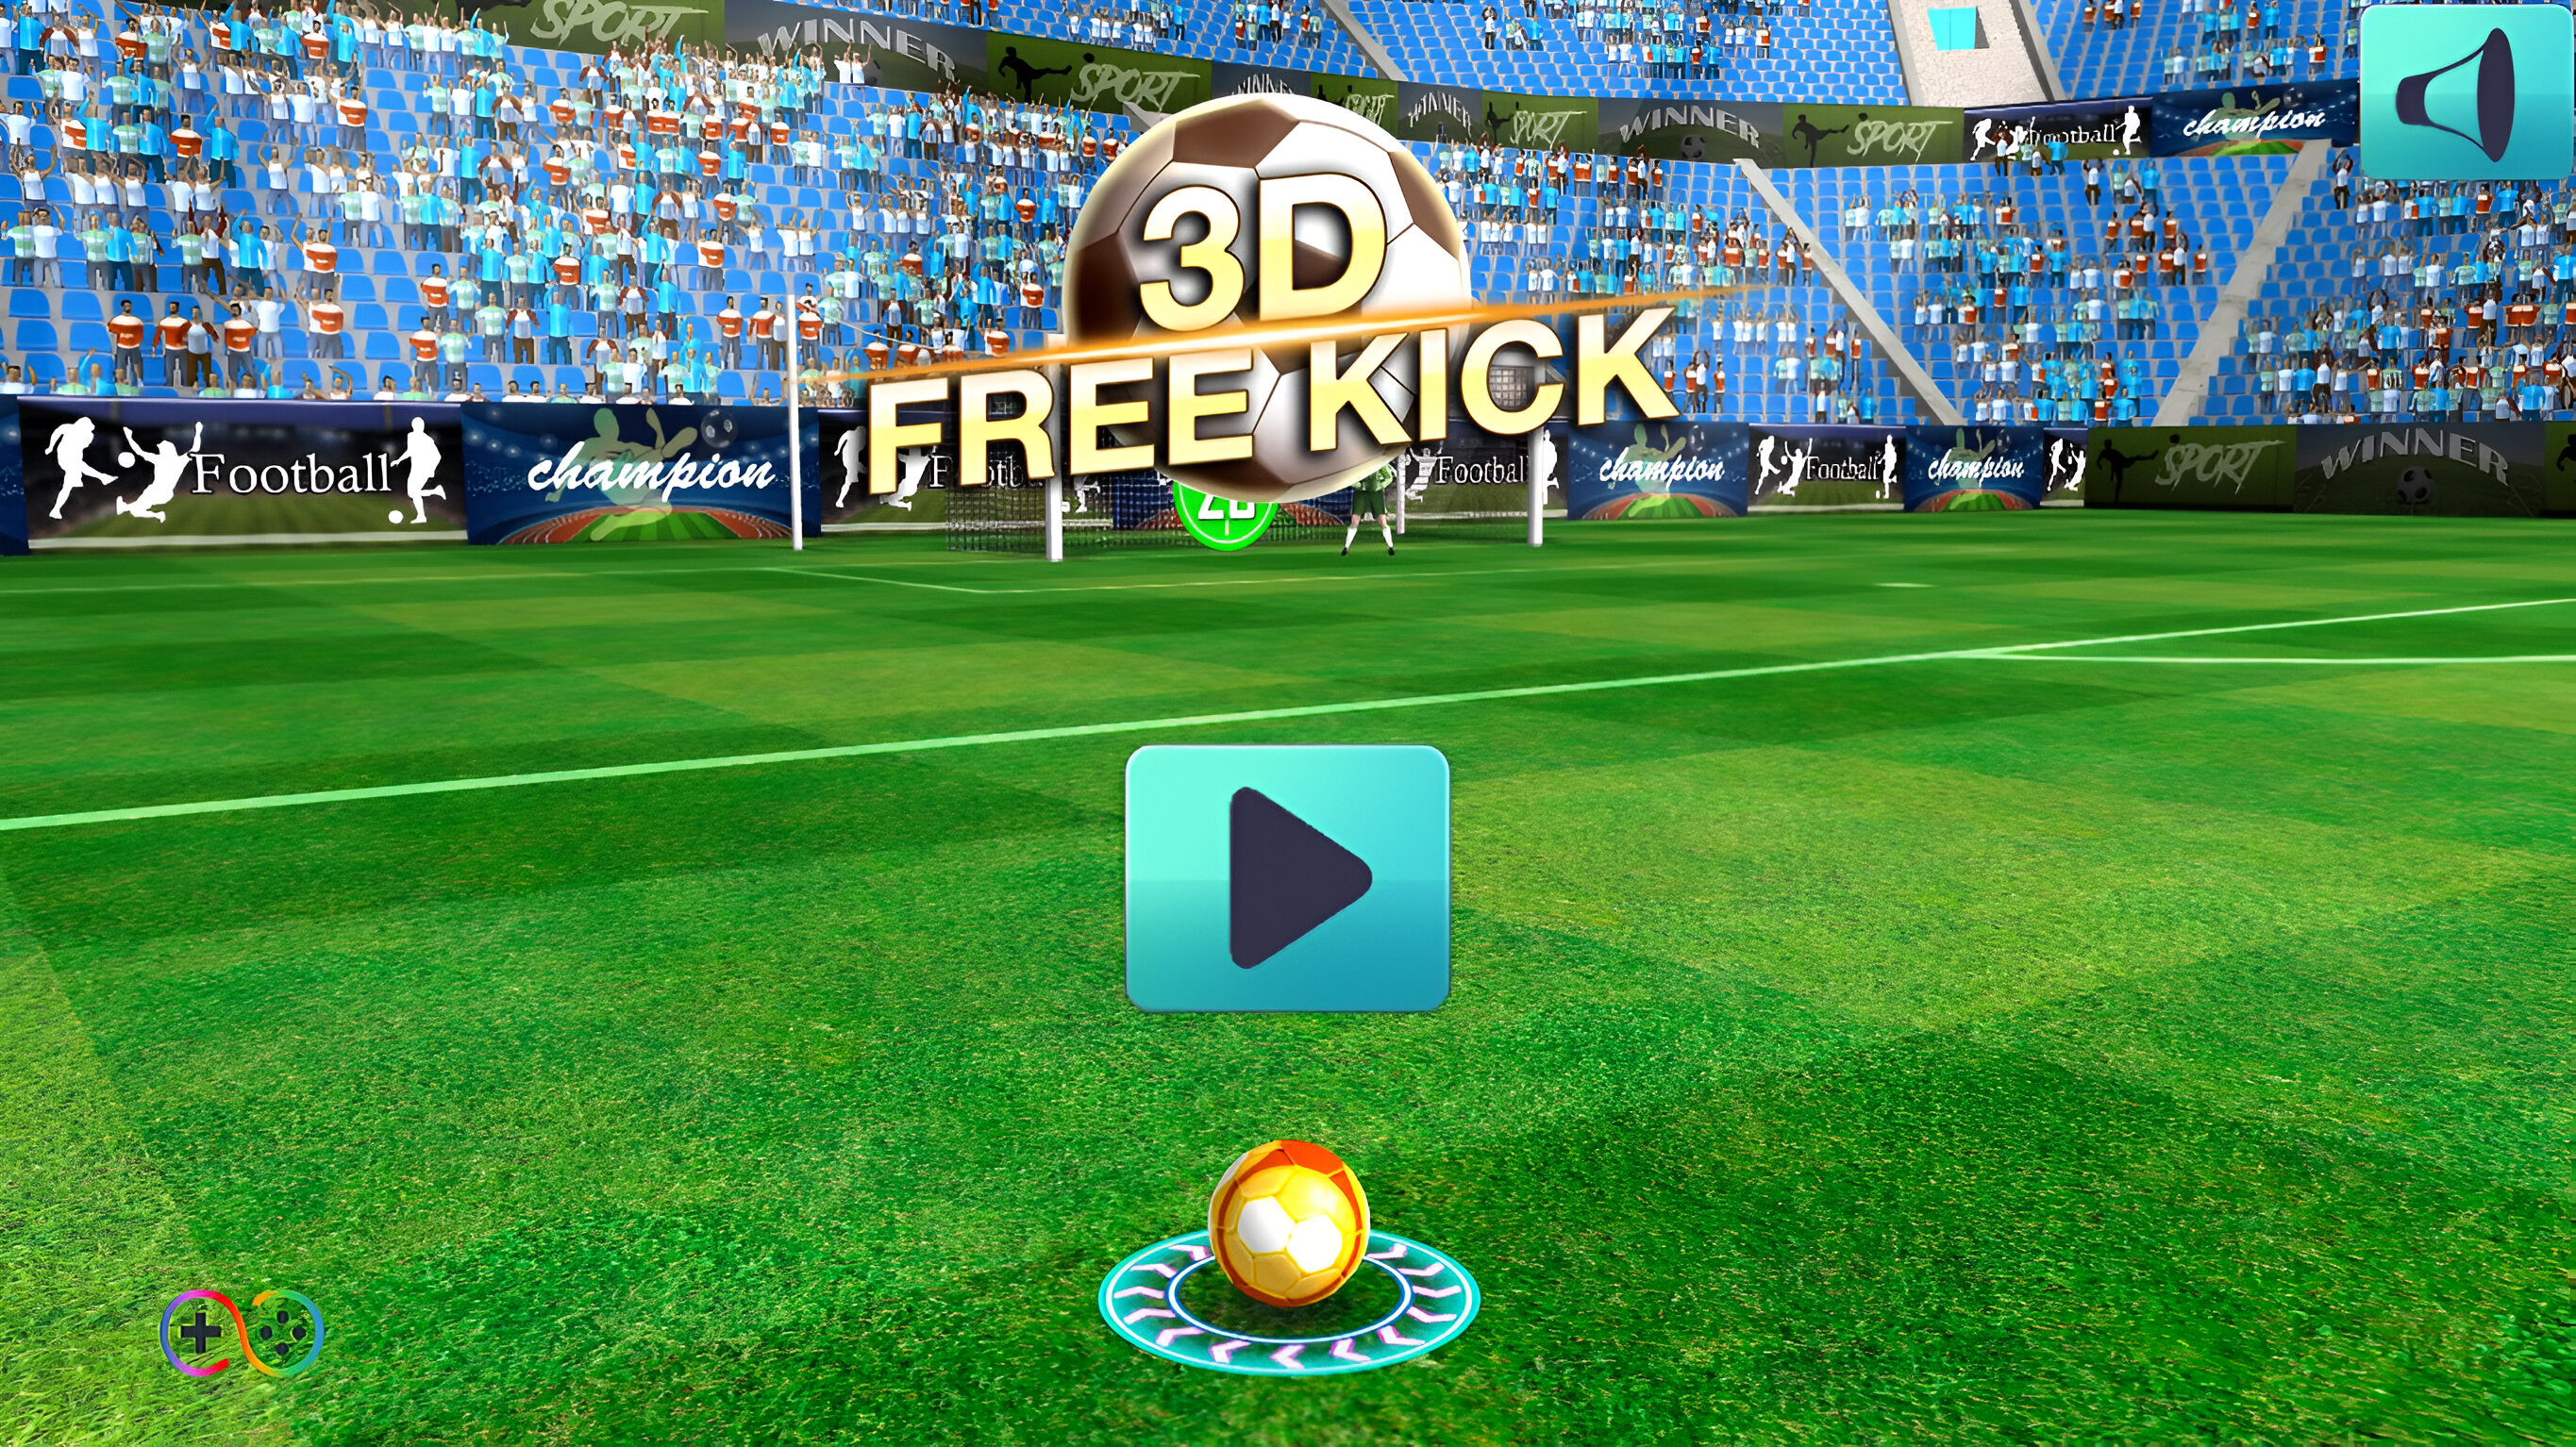 3D Free Kick – Play Free Online Soccer Game